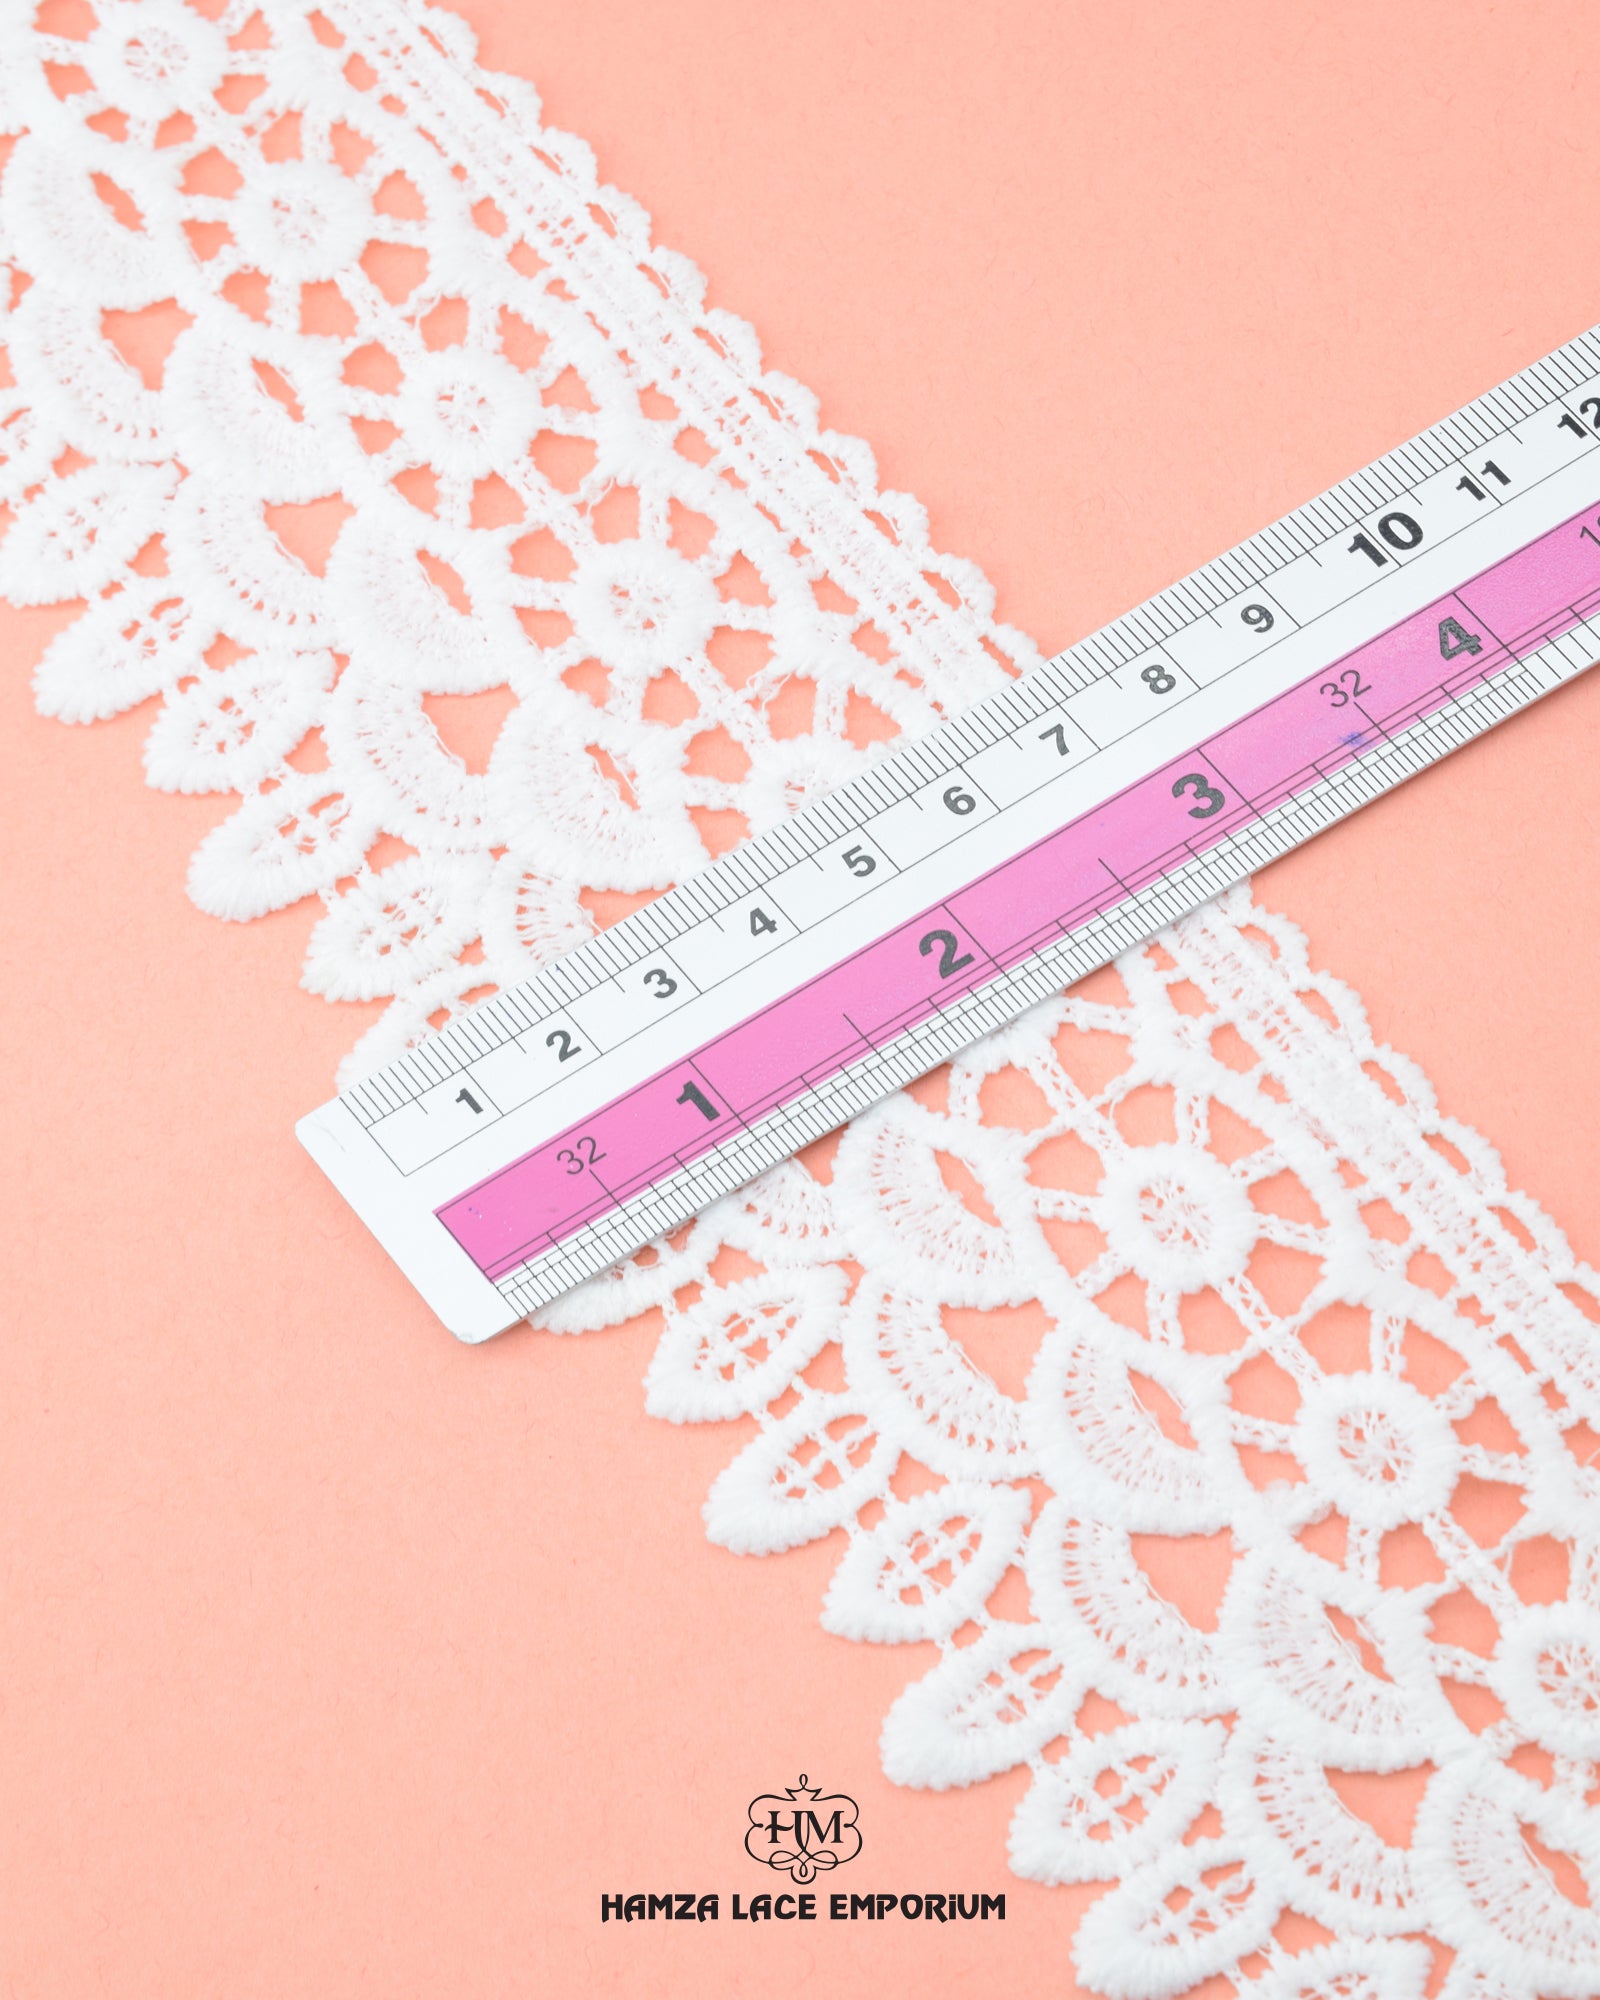 Size of the 'Edging Lace 21743' is shown as '3' inches with the help of a ruler